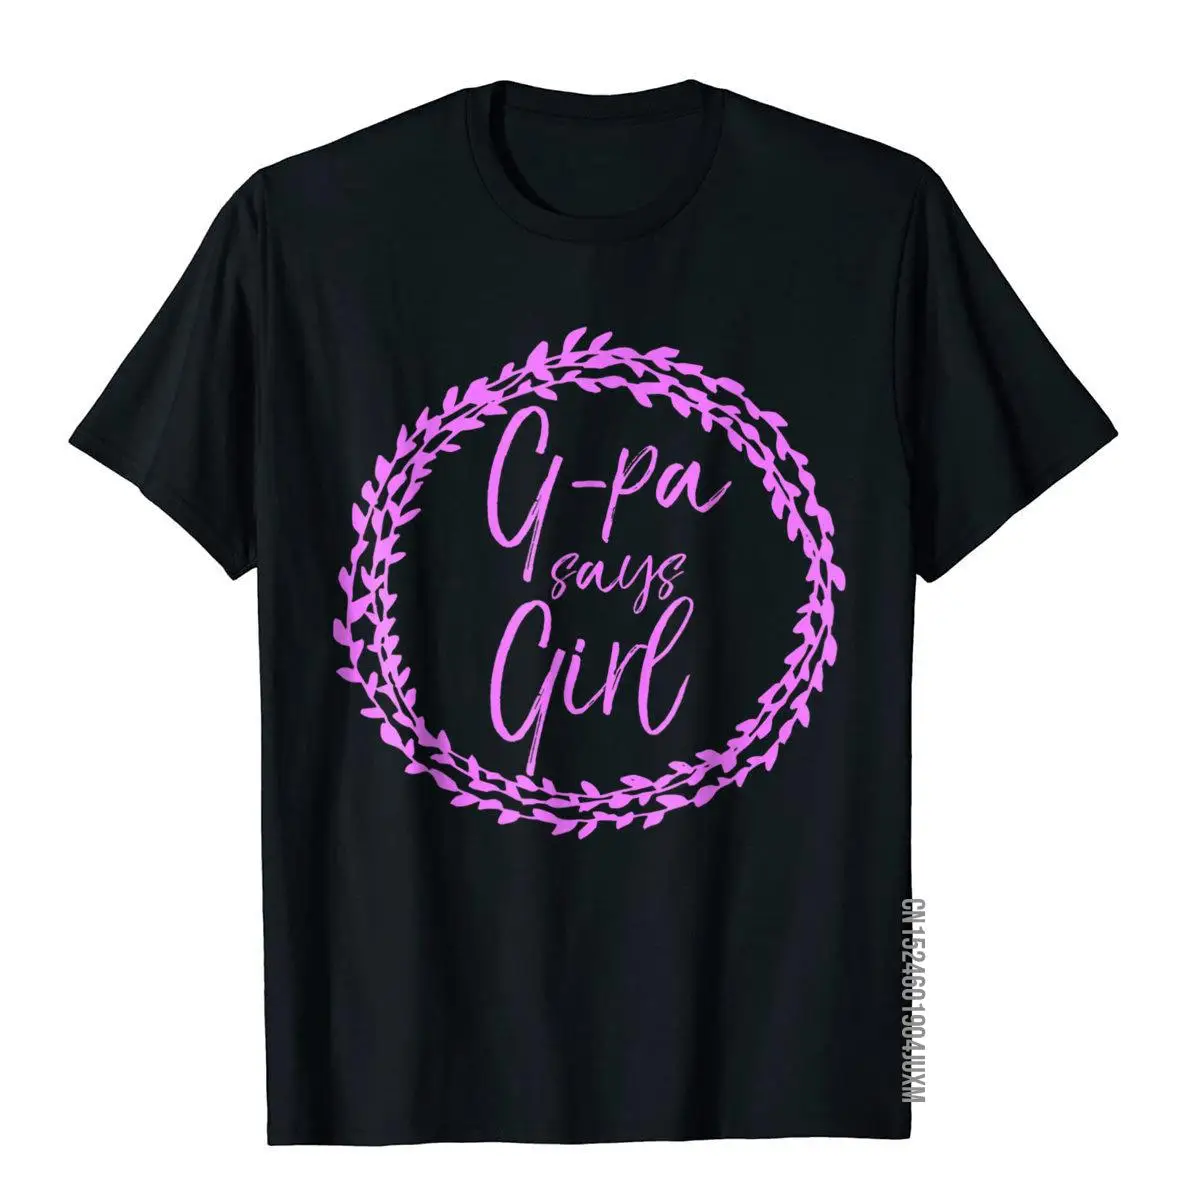 G-Pa Says Girl Shirt Pink Gender Reveal Shirt For Grandpa Cotton Men Tees Group T Shirts On Sale